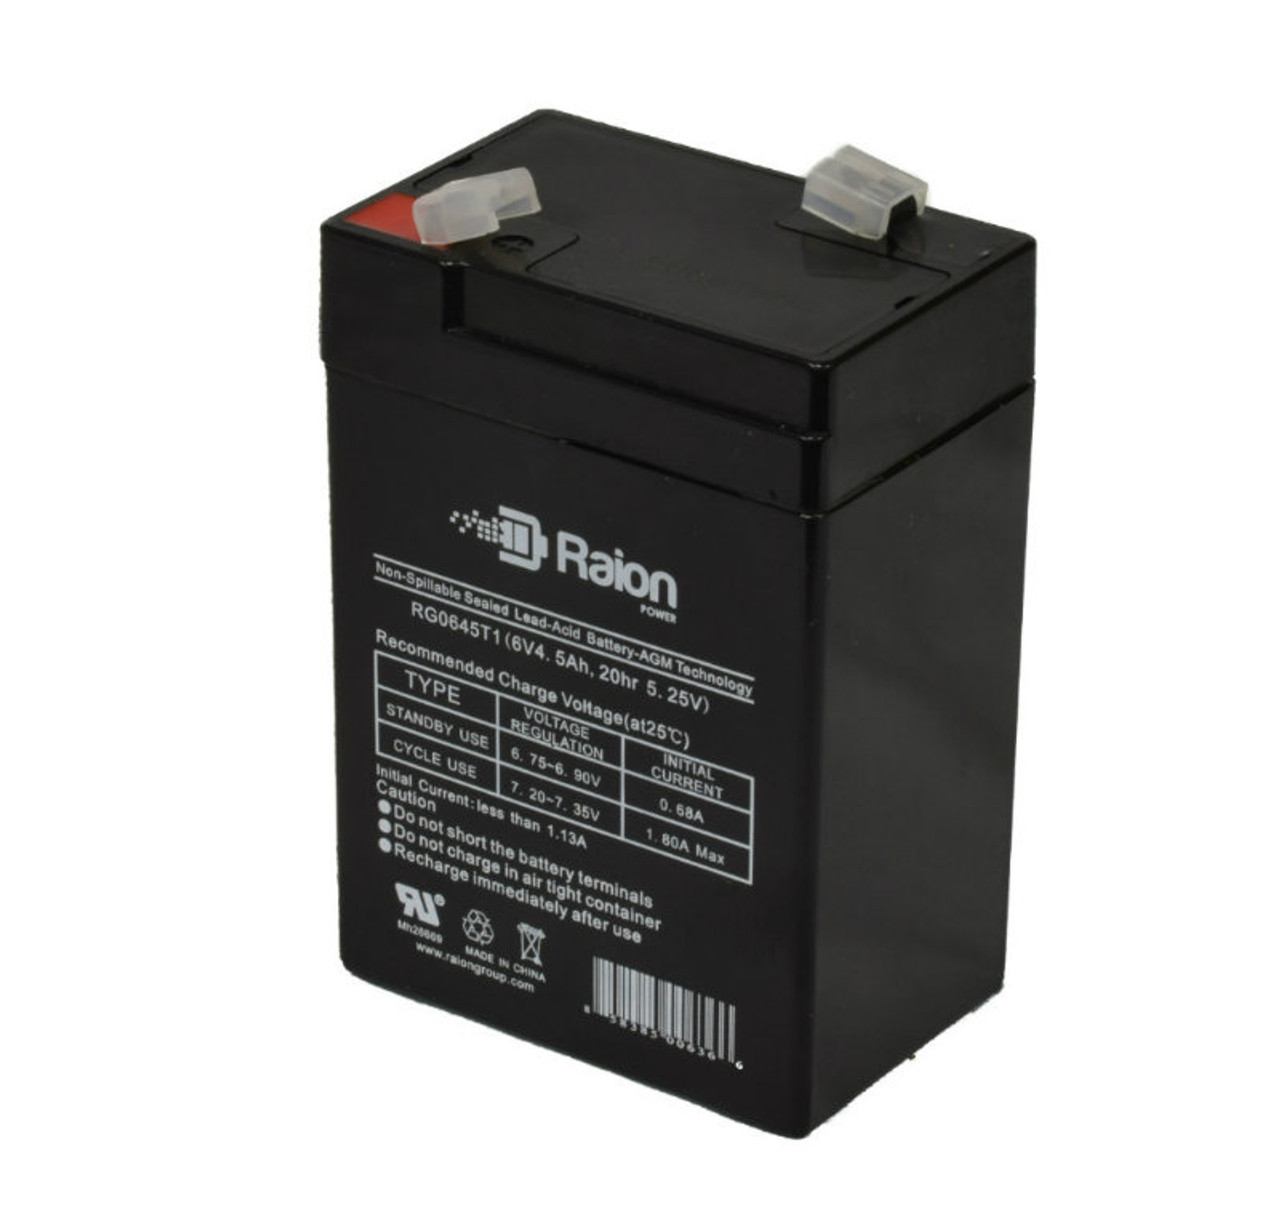 Raion Power RG0645T1 6V 4.5Ah Replacement Battery Cartridge for Sunnyway SW645